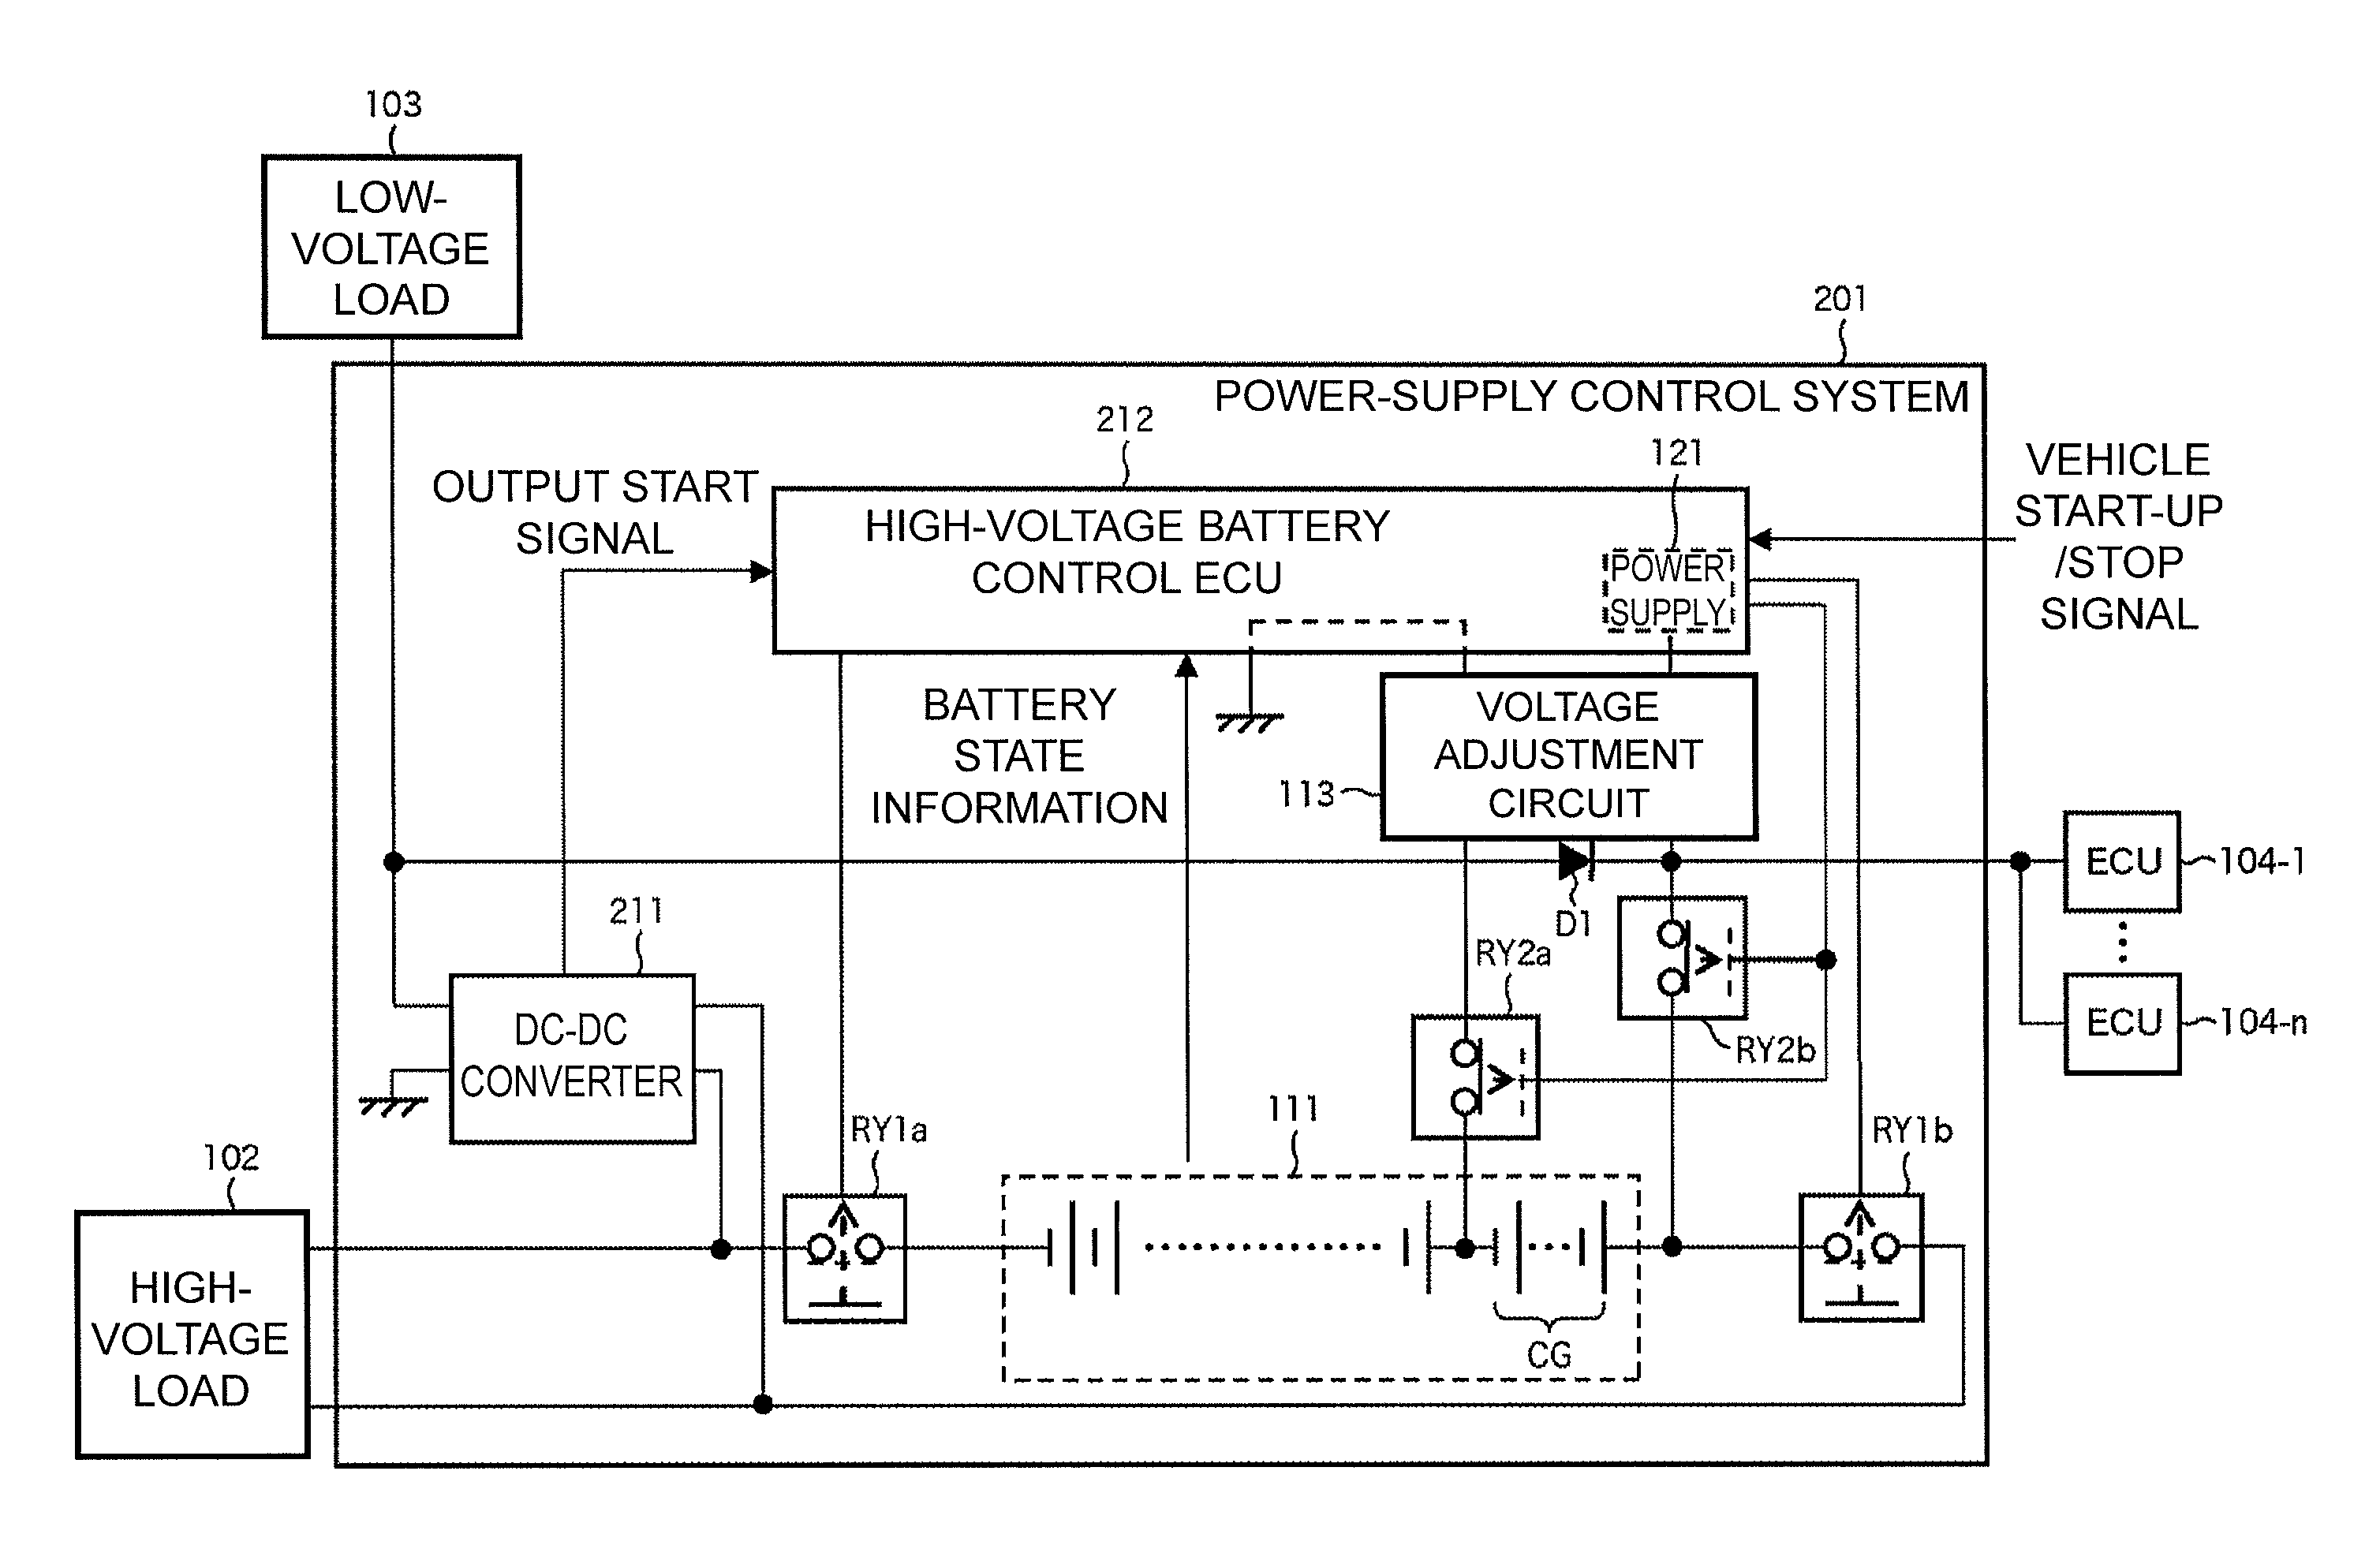 Power-supply control device